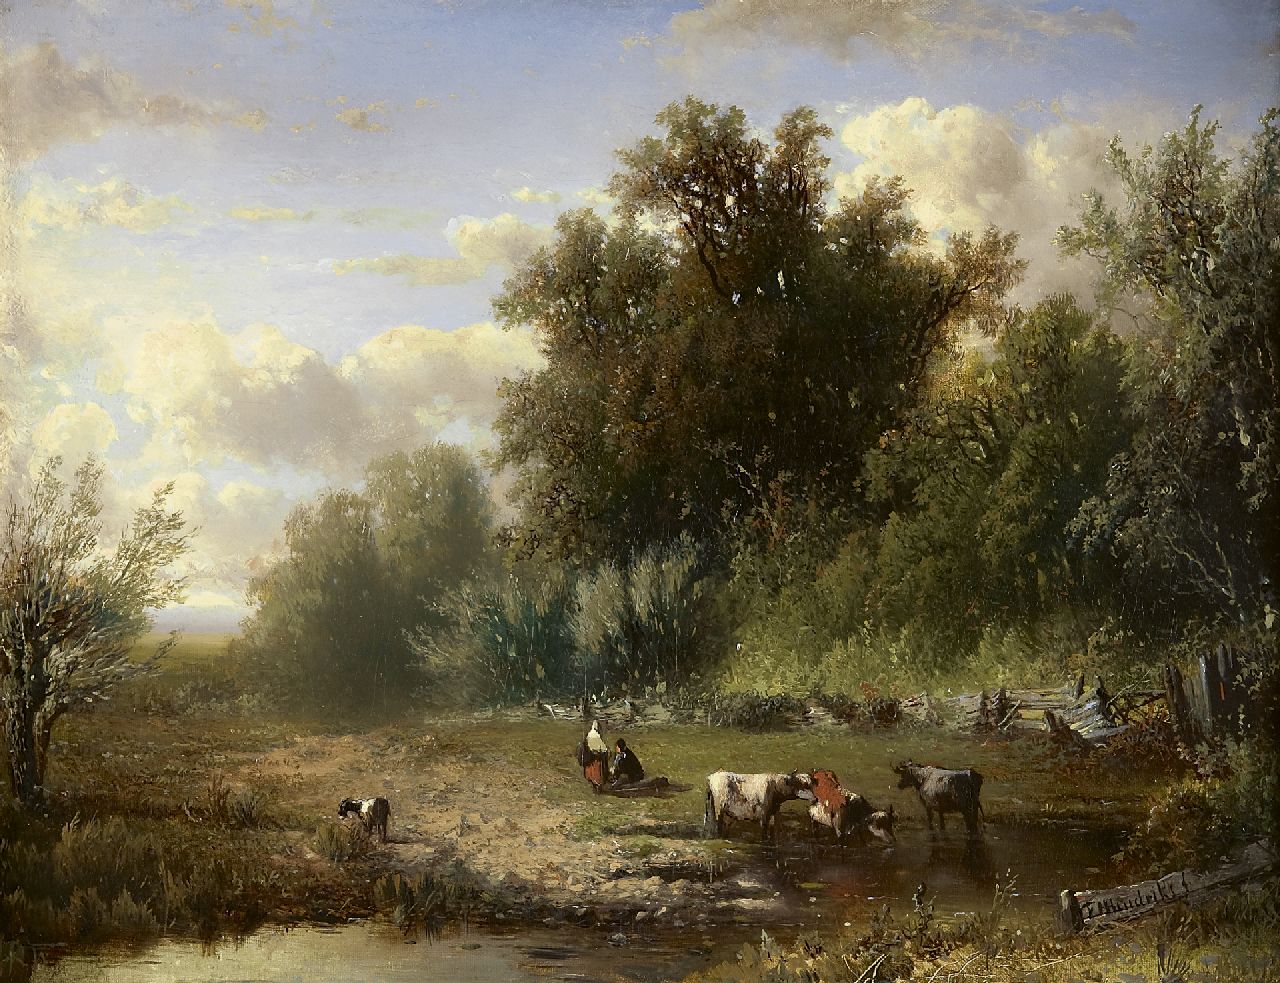 Hendriks F.H.  | Frederik Hendrik Hendriks, Cattle and resting figures, oil on canvas laid down on panel 37.9 x 49.4 cm, signed l.r.